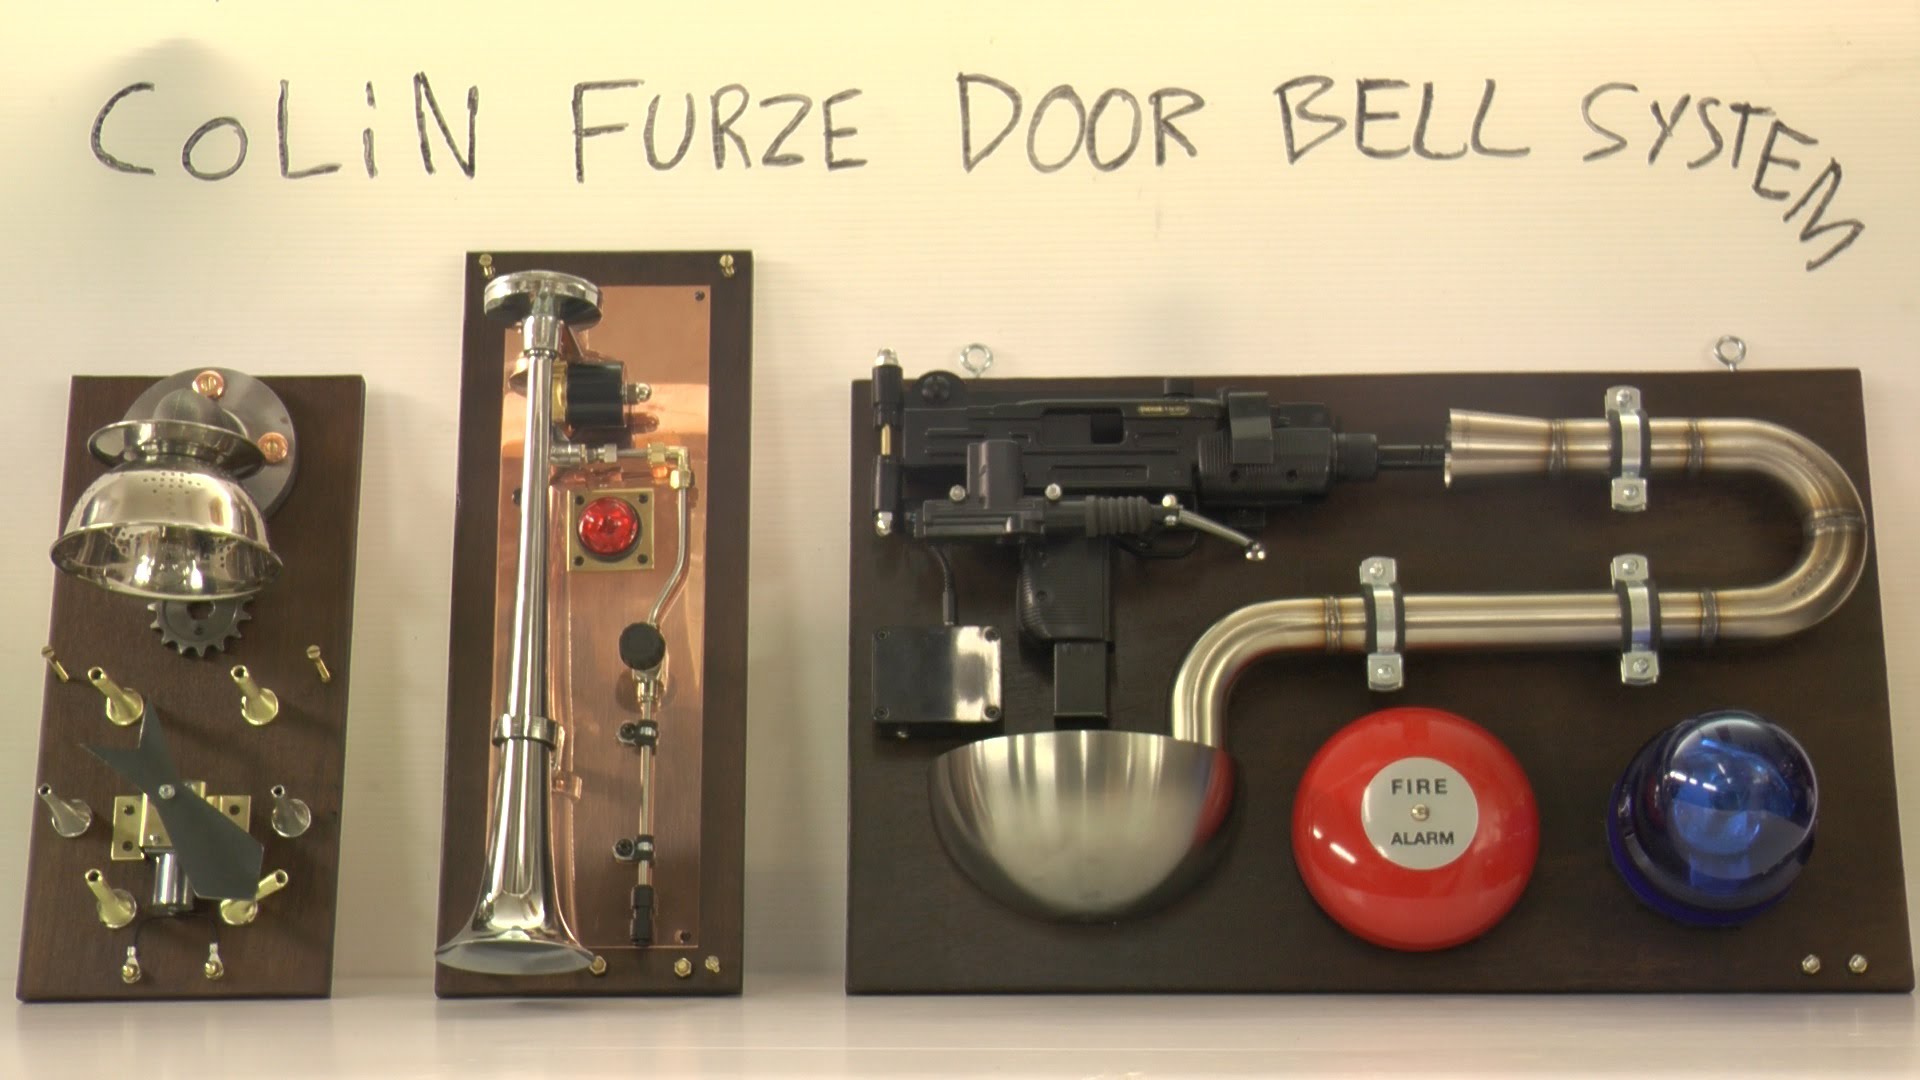 Colin Furze’s Three Piece Doorbell System Includes an Uzi That Sprays Bullets